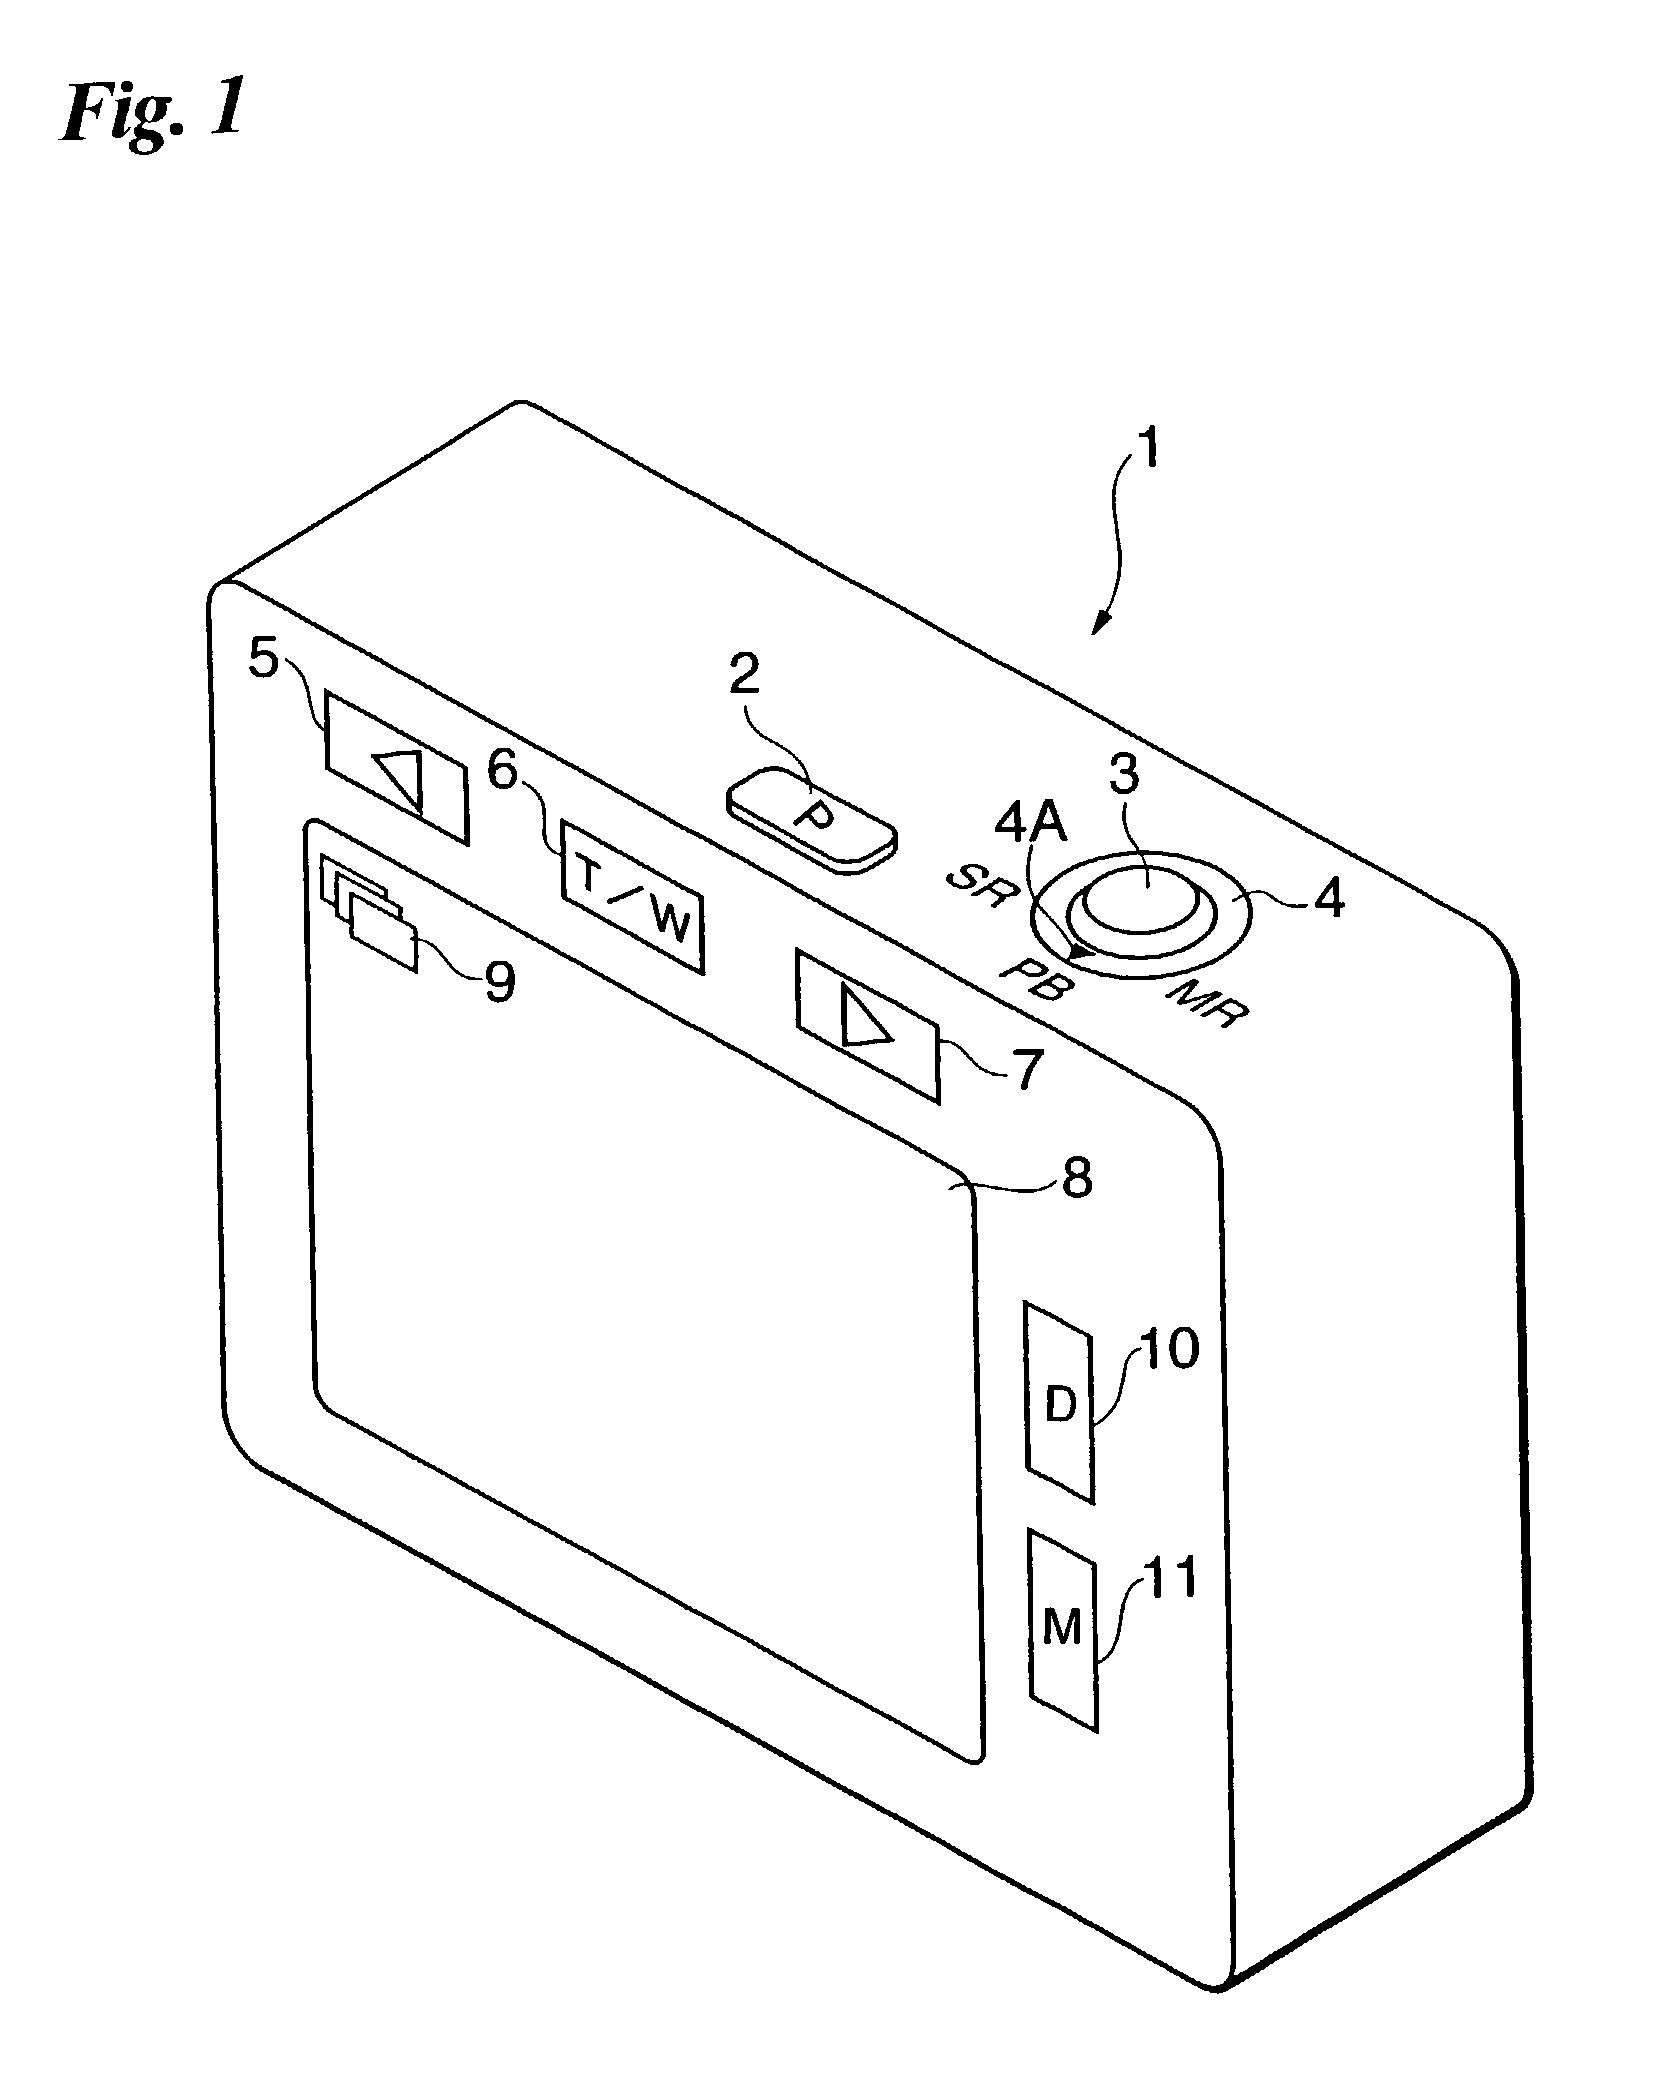 Digital movie camera and method of controlling operations thereof